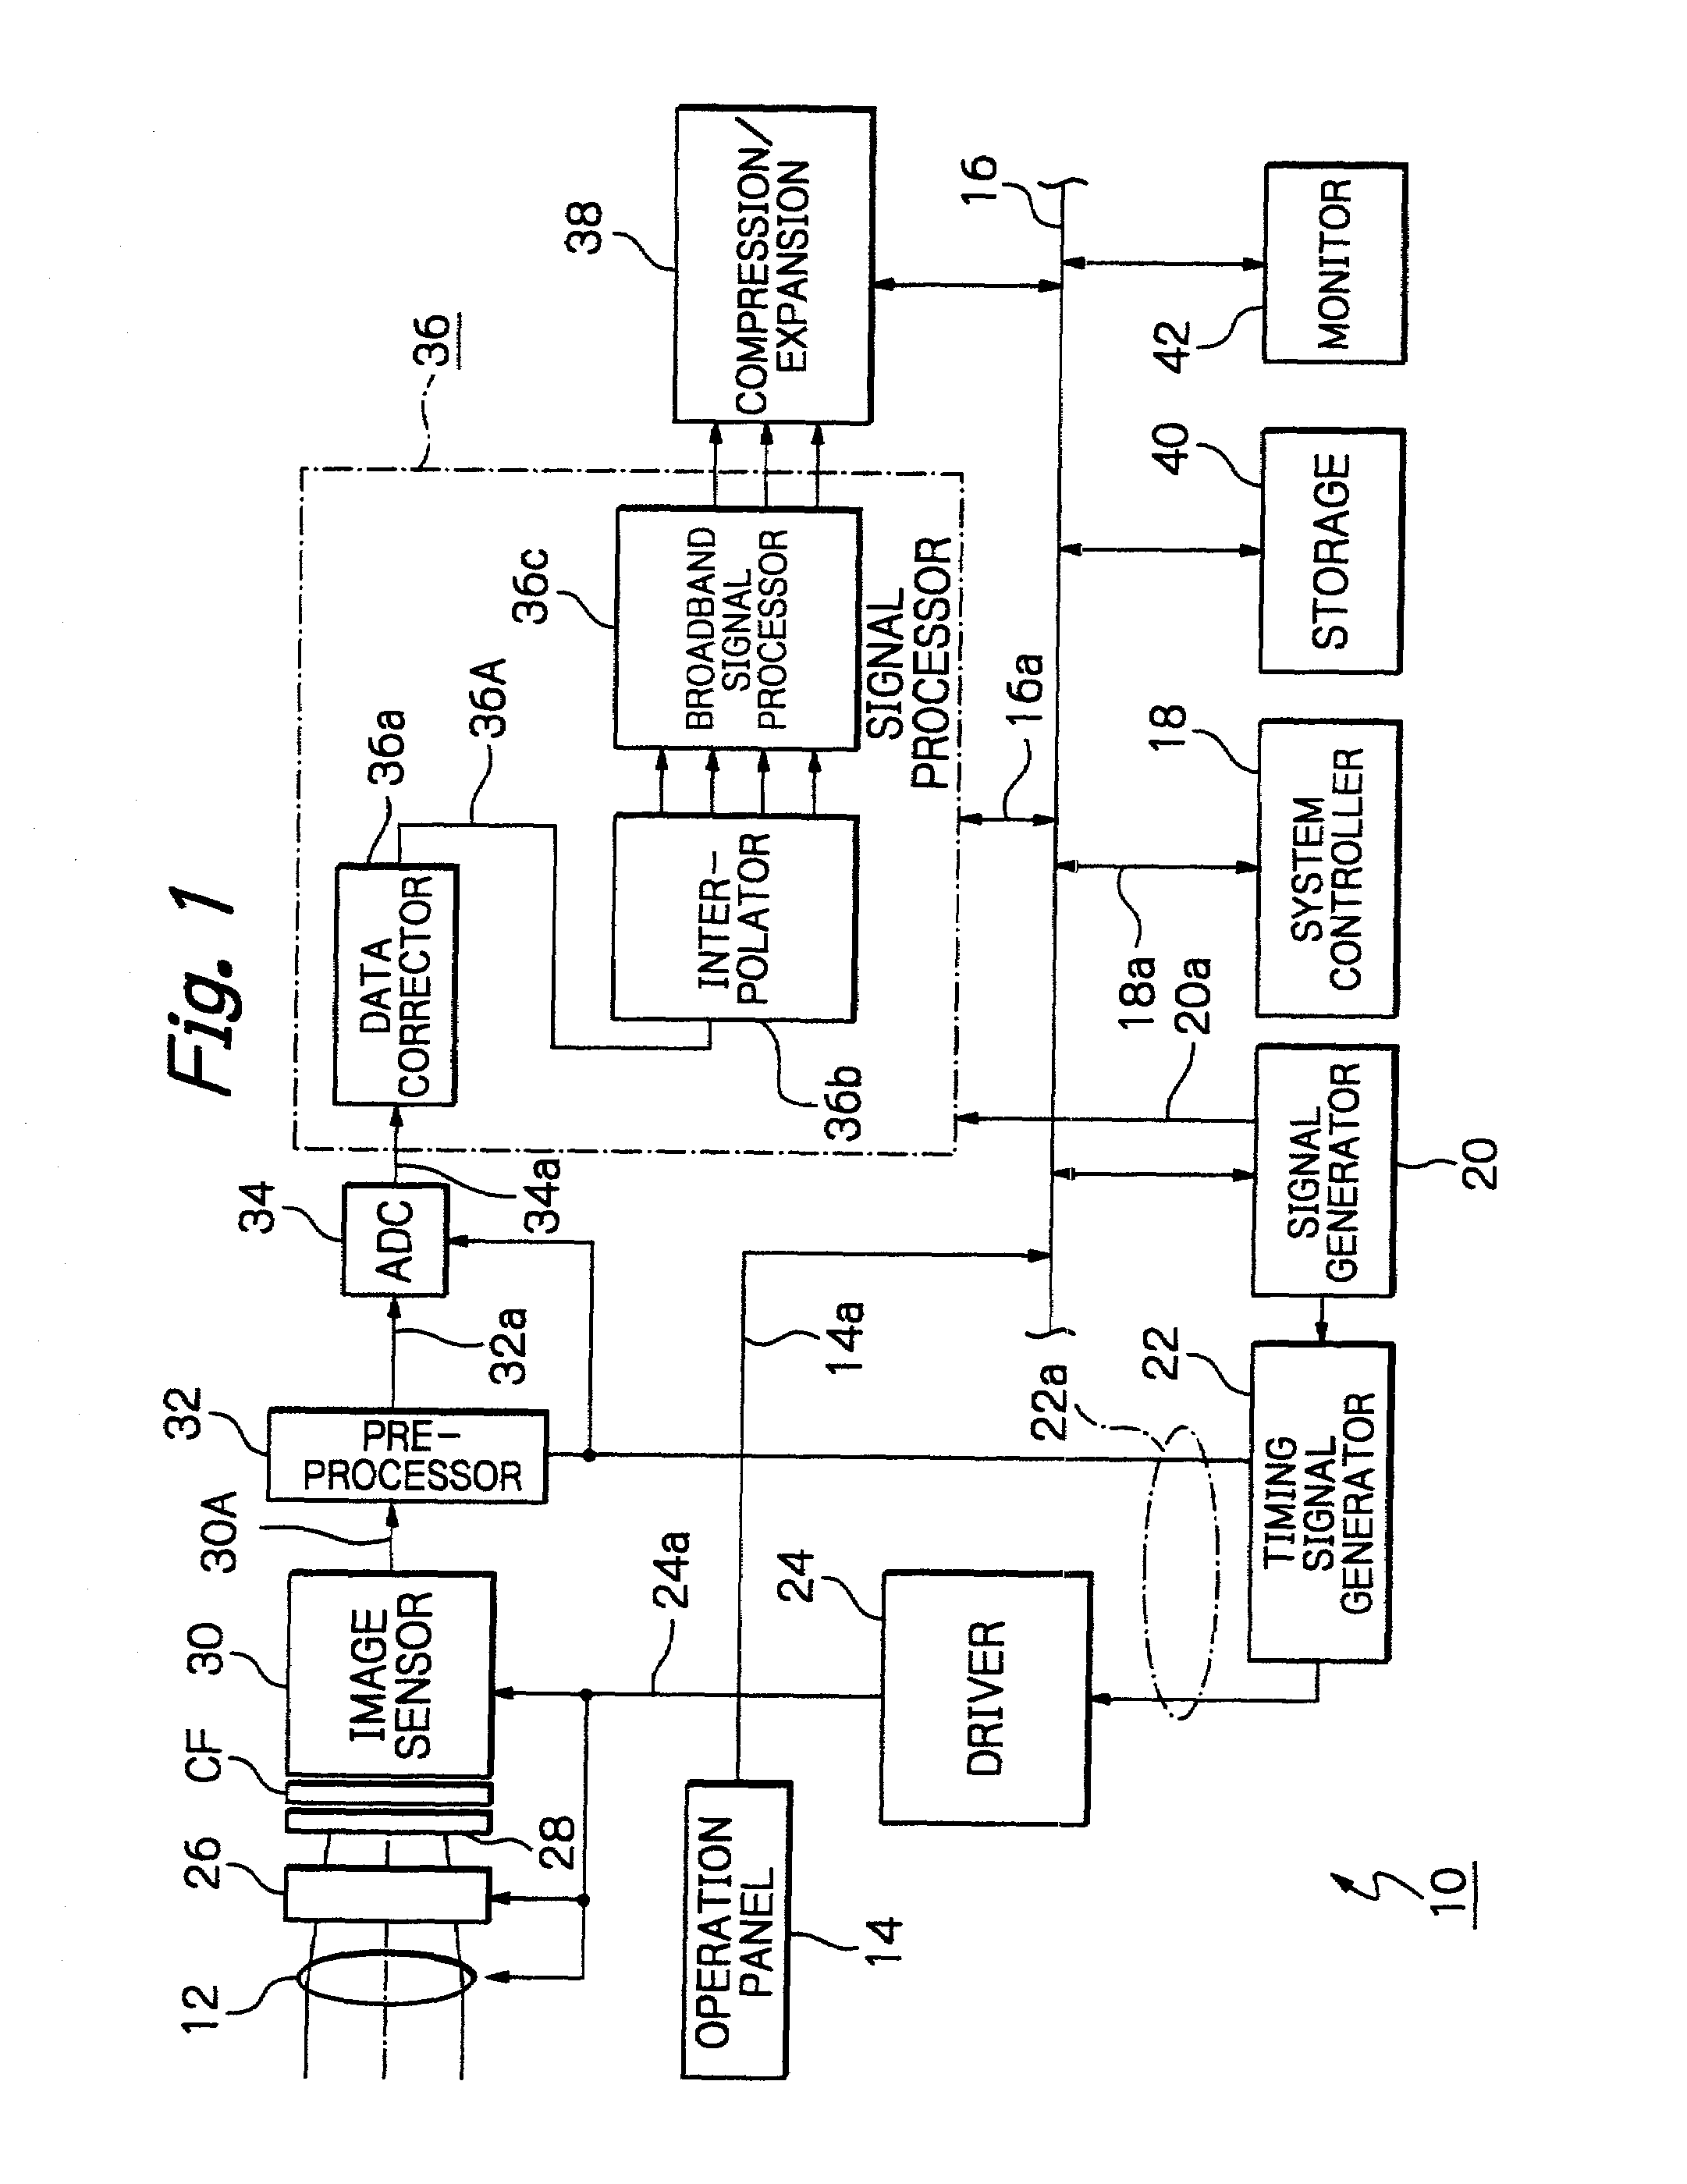 Solid-state honeycomb type image pickup apparatus using a complementary color filter and signal processing method therefor